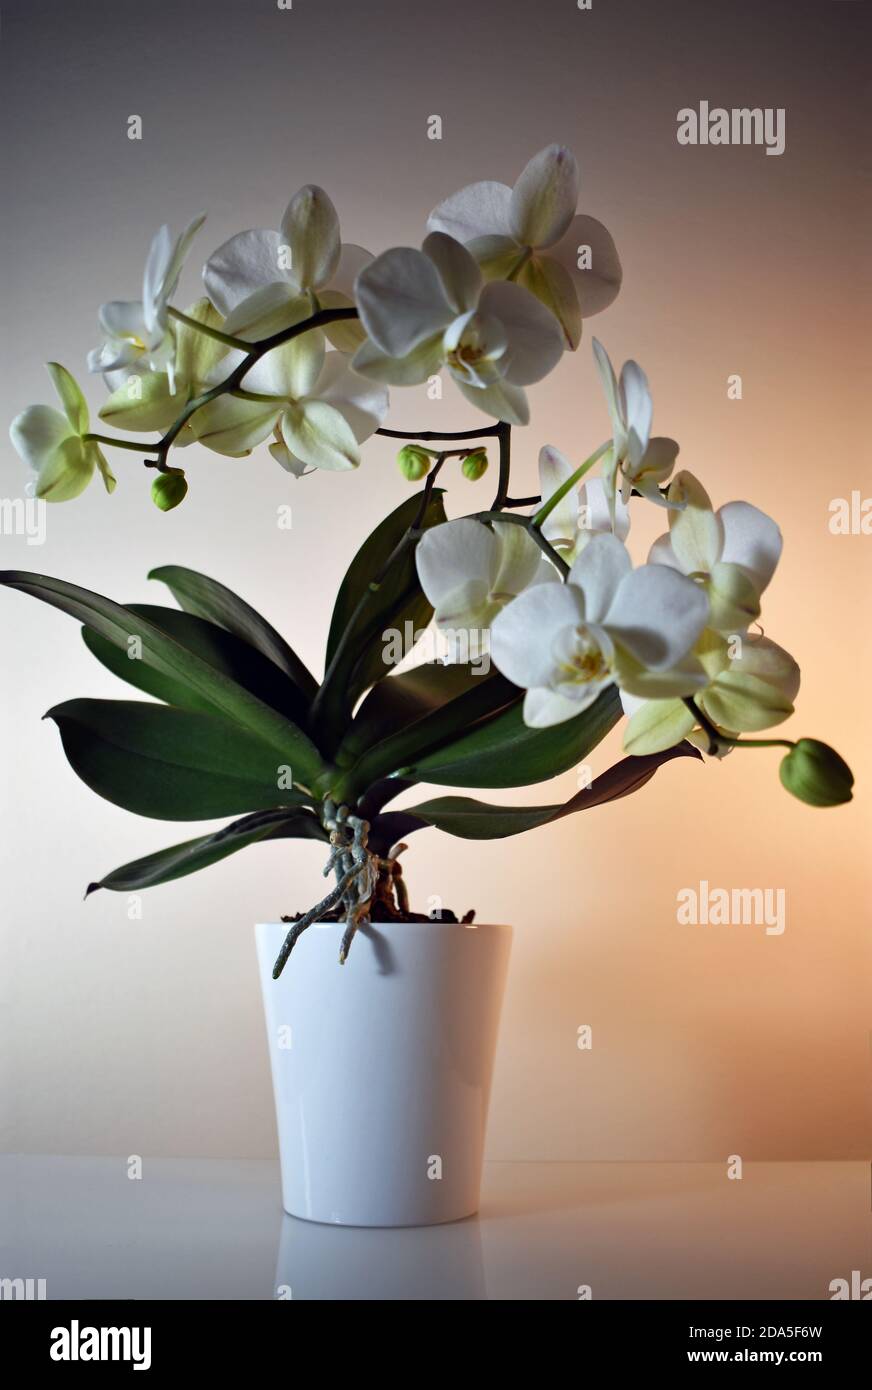 A White Orchid (Phalaenopsis) against a gradually fading white to warm white / orange background. The orchid is potted in a white ceramic vase. Stock Photo